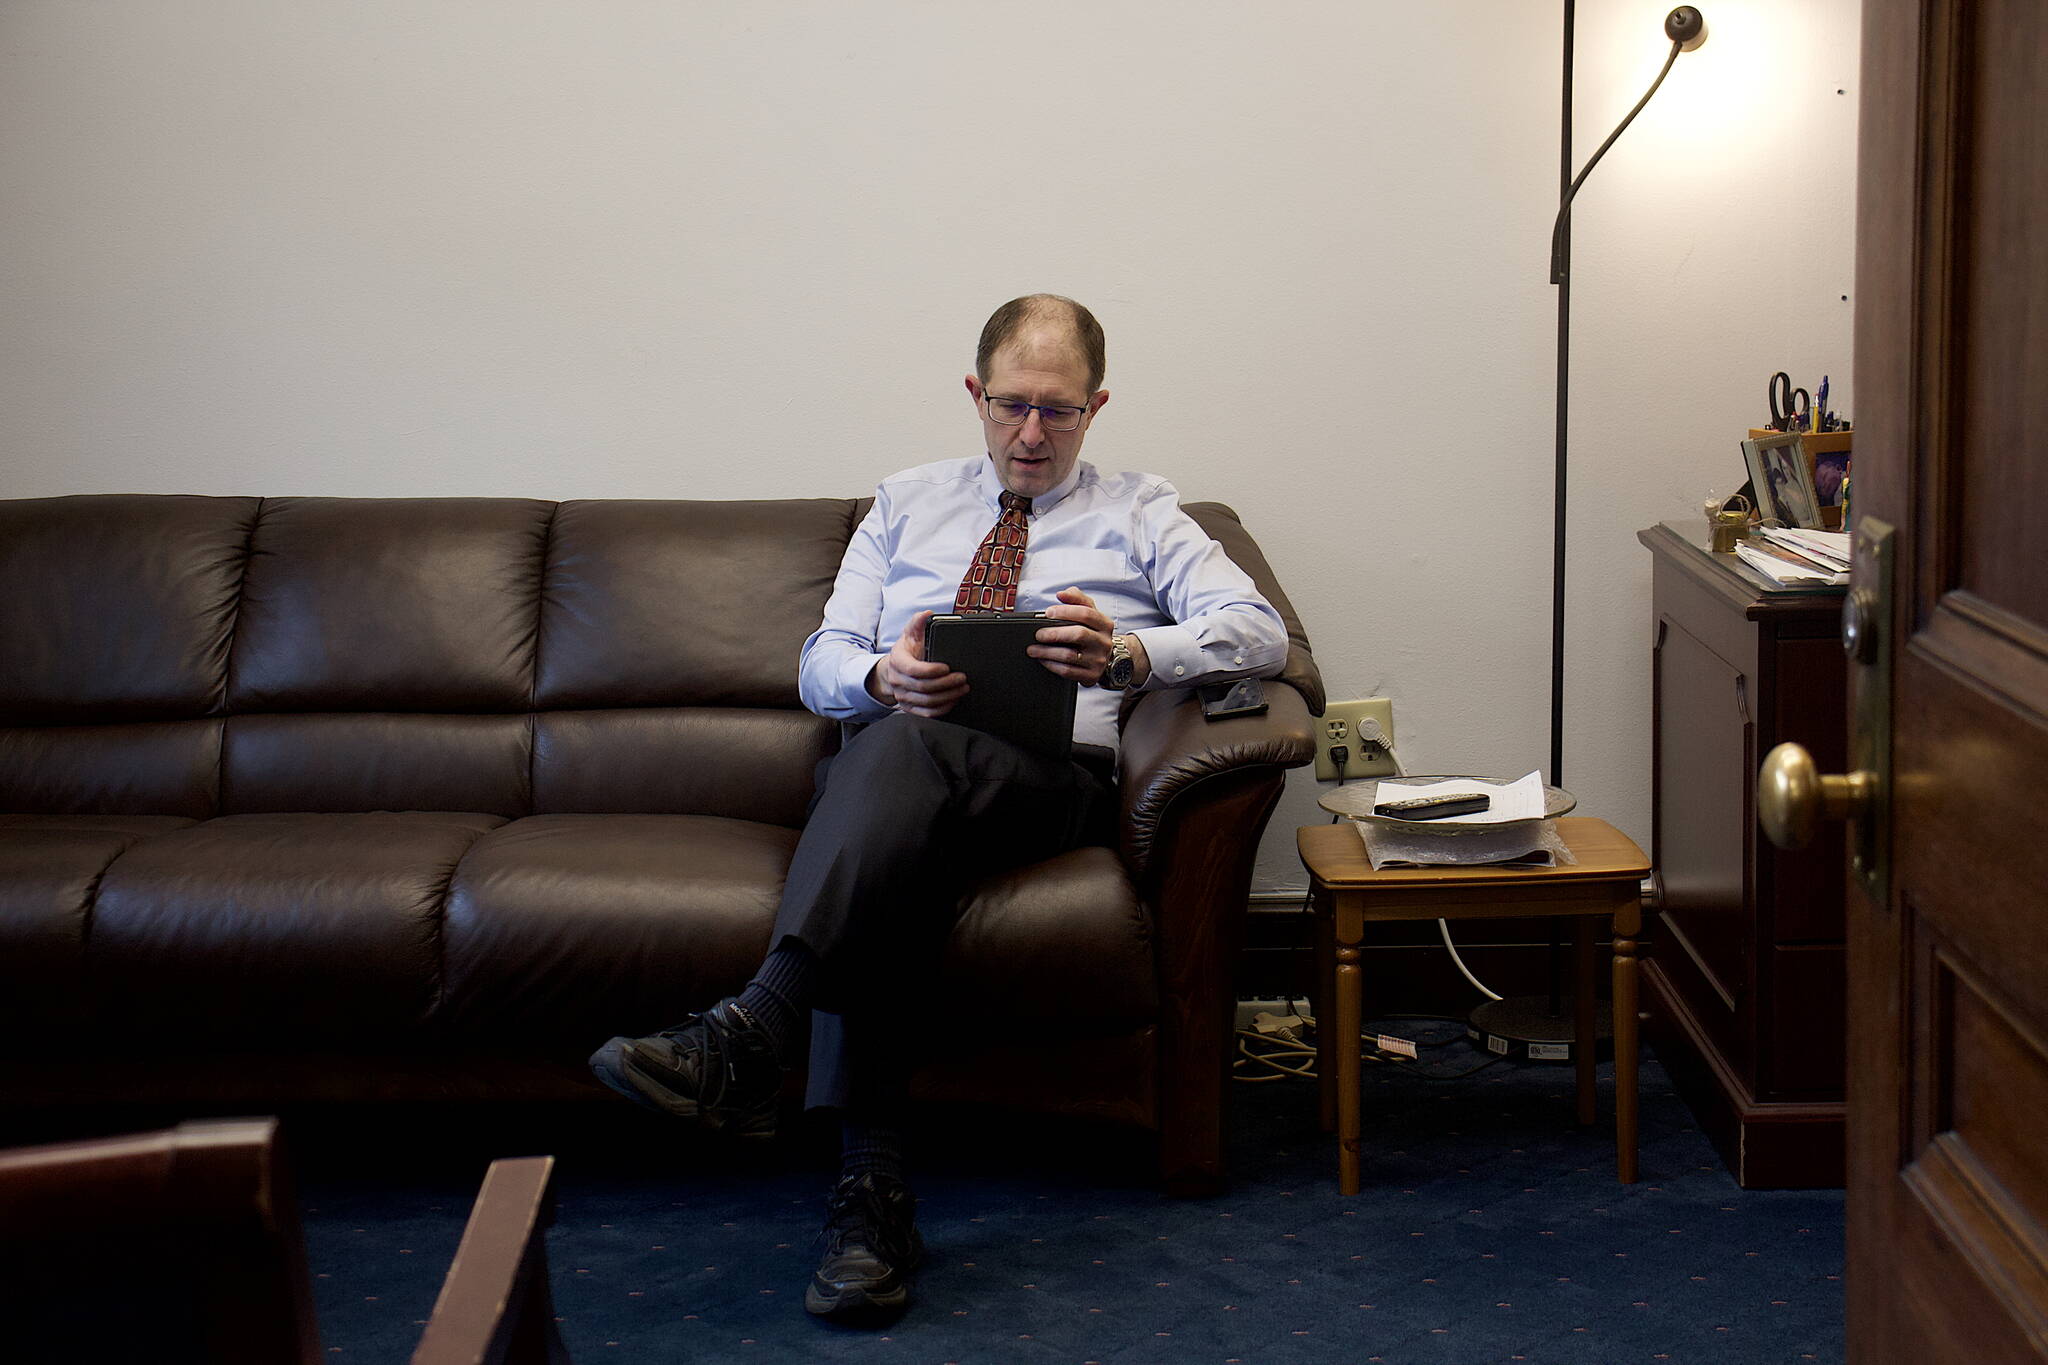 State Sen. Jesse Kiehl, D-Juneau, sits alone in his office Sunday morning as only a few people showed up at the Alaska State Capitol after both the House and Senate cancelled their scheduled floor sessions for the day. (Mark Sabbatini / Juneau Empire)